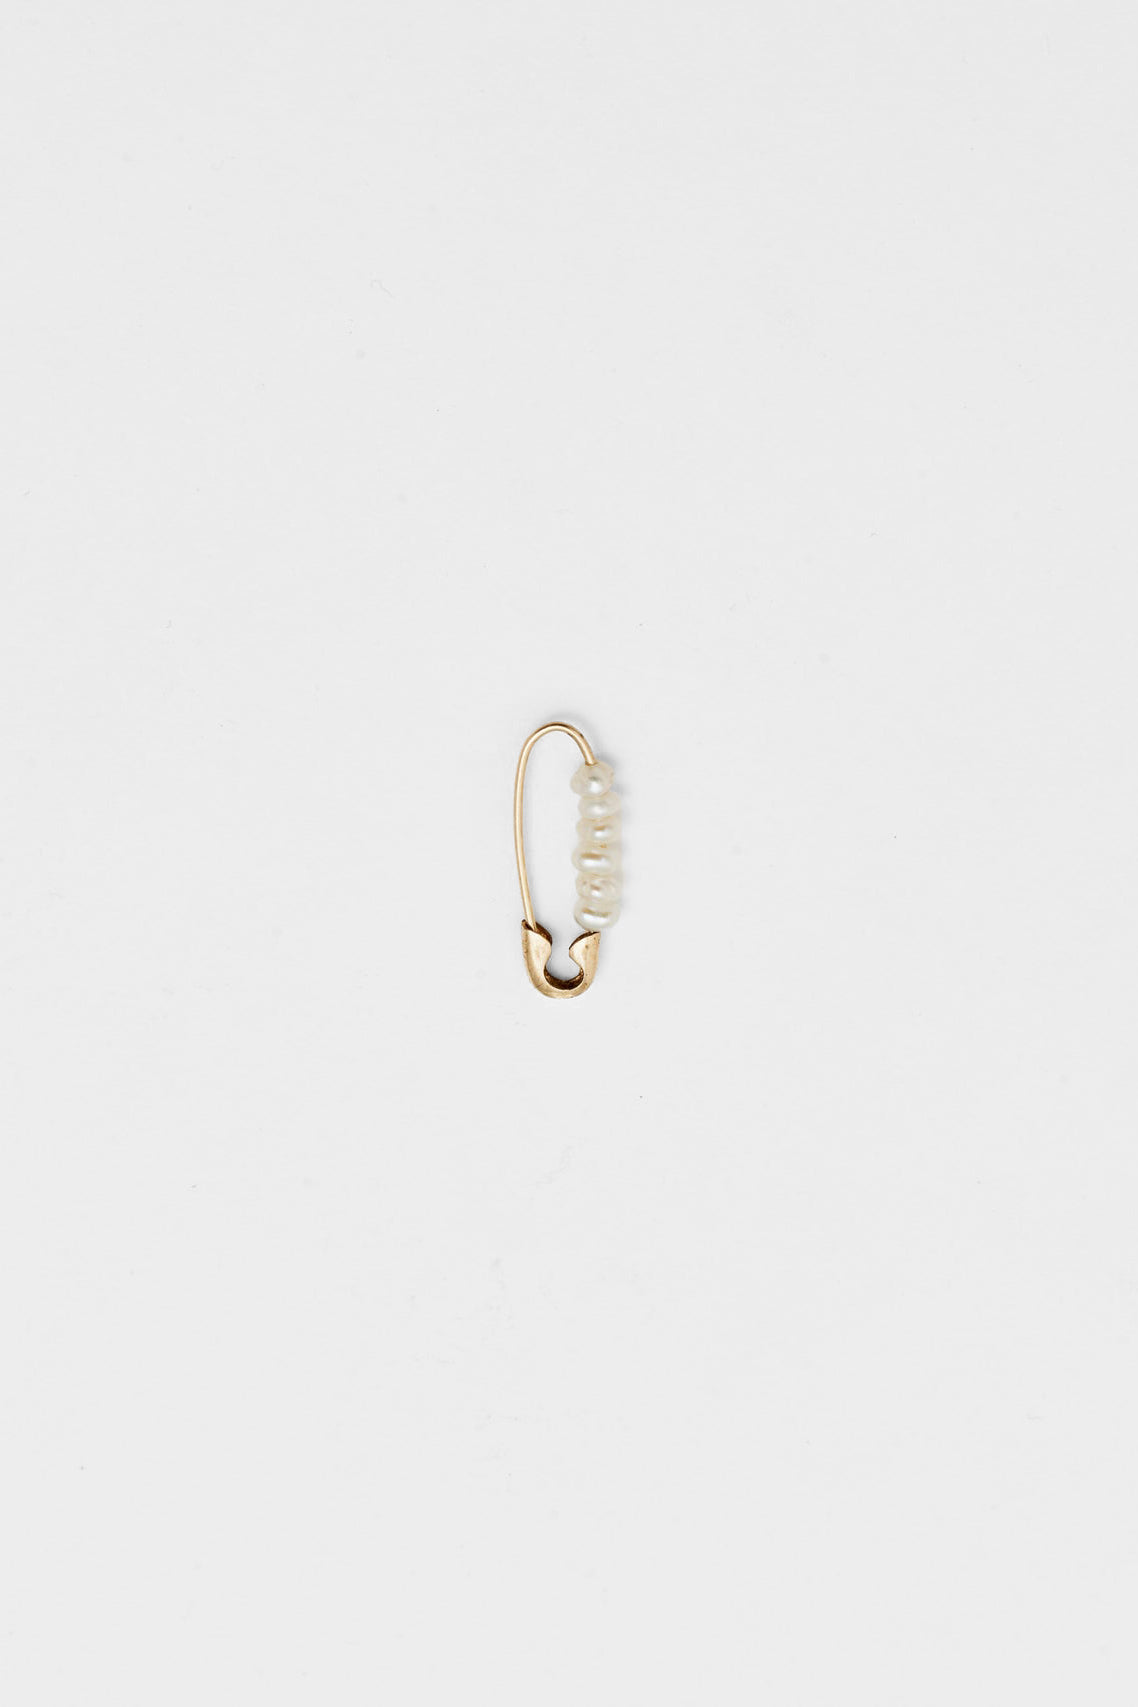 Mini Friendship Safety Pin Earring in 14k Yellow Gold